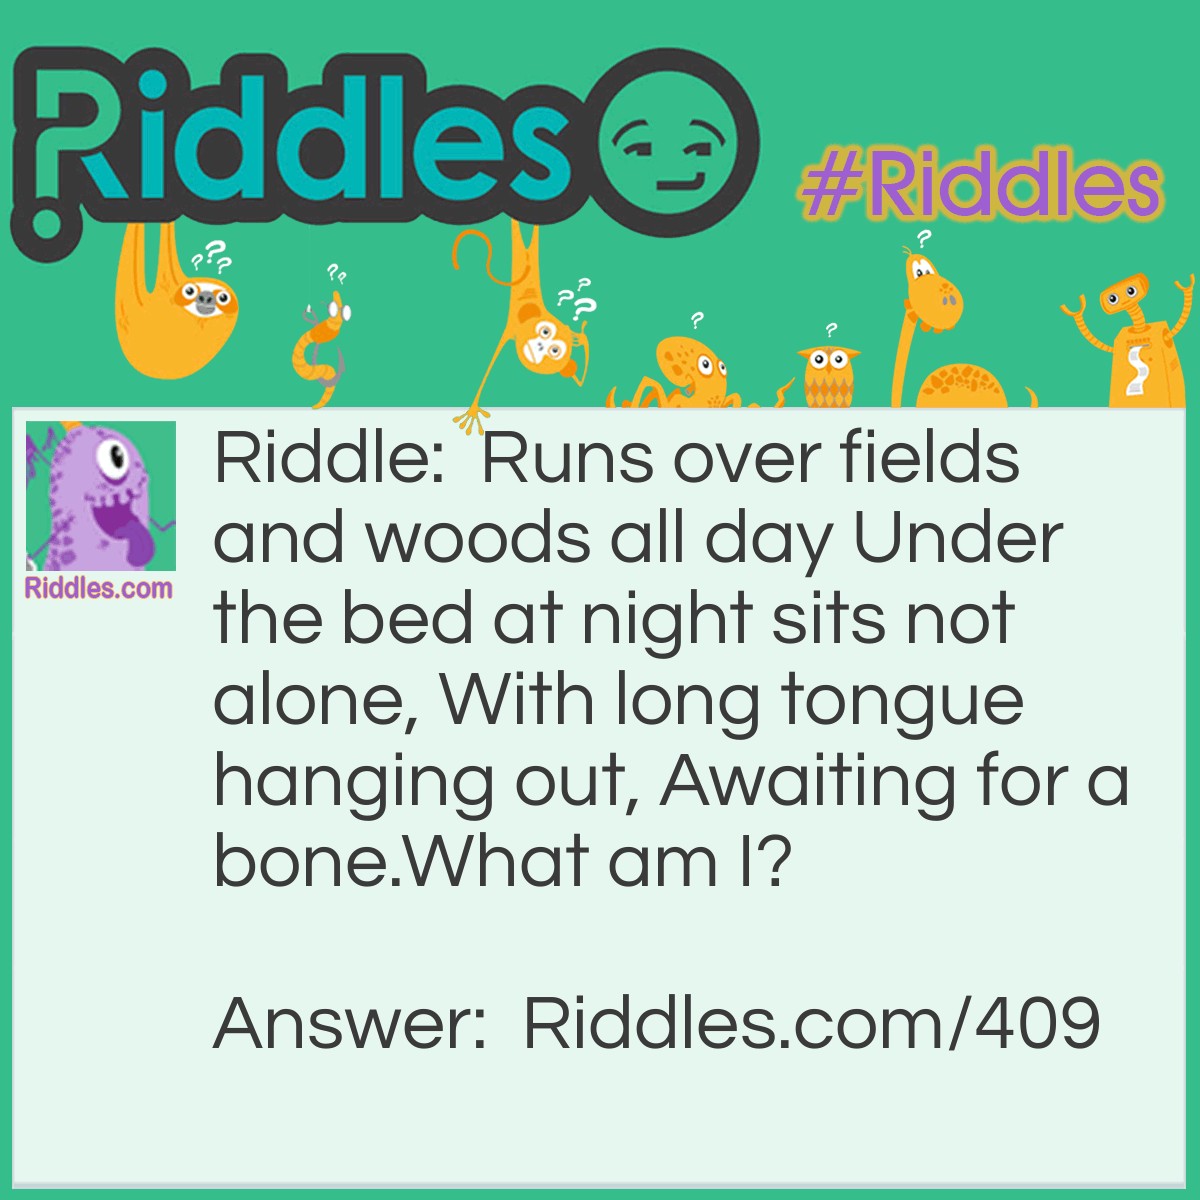 Riddle: Runs over fields and woods all day Under the bed at night sits not alone, With long tongue hanging out, Awaiting for a bone. What am I? Answer: A shoe.